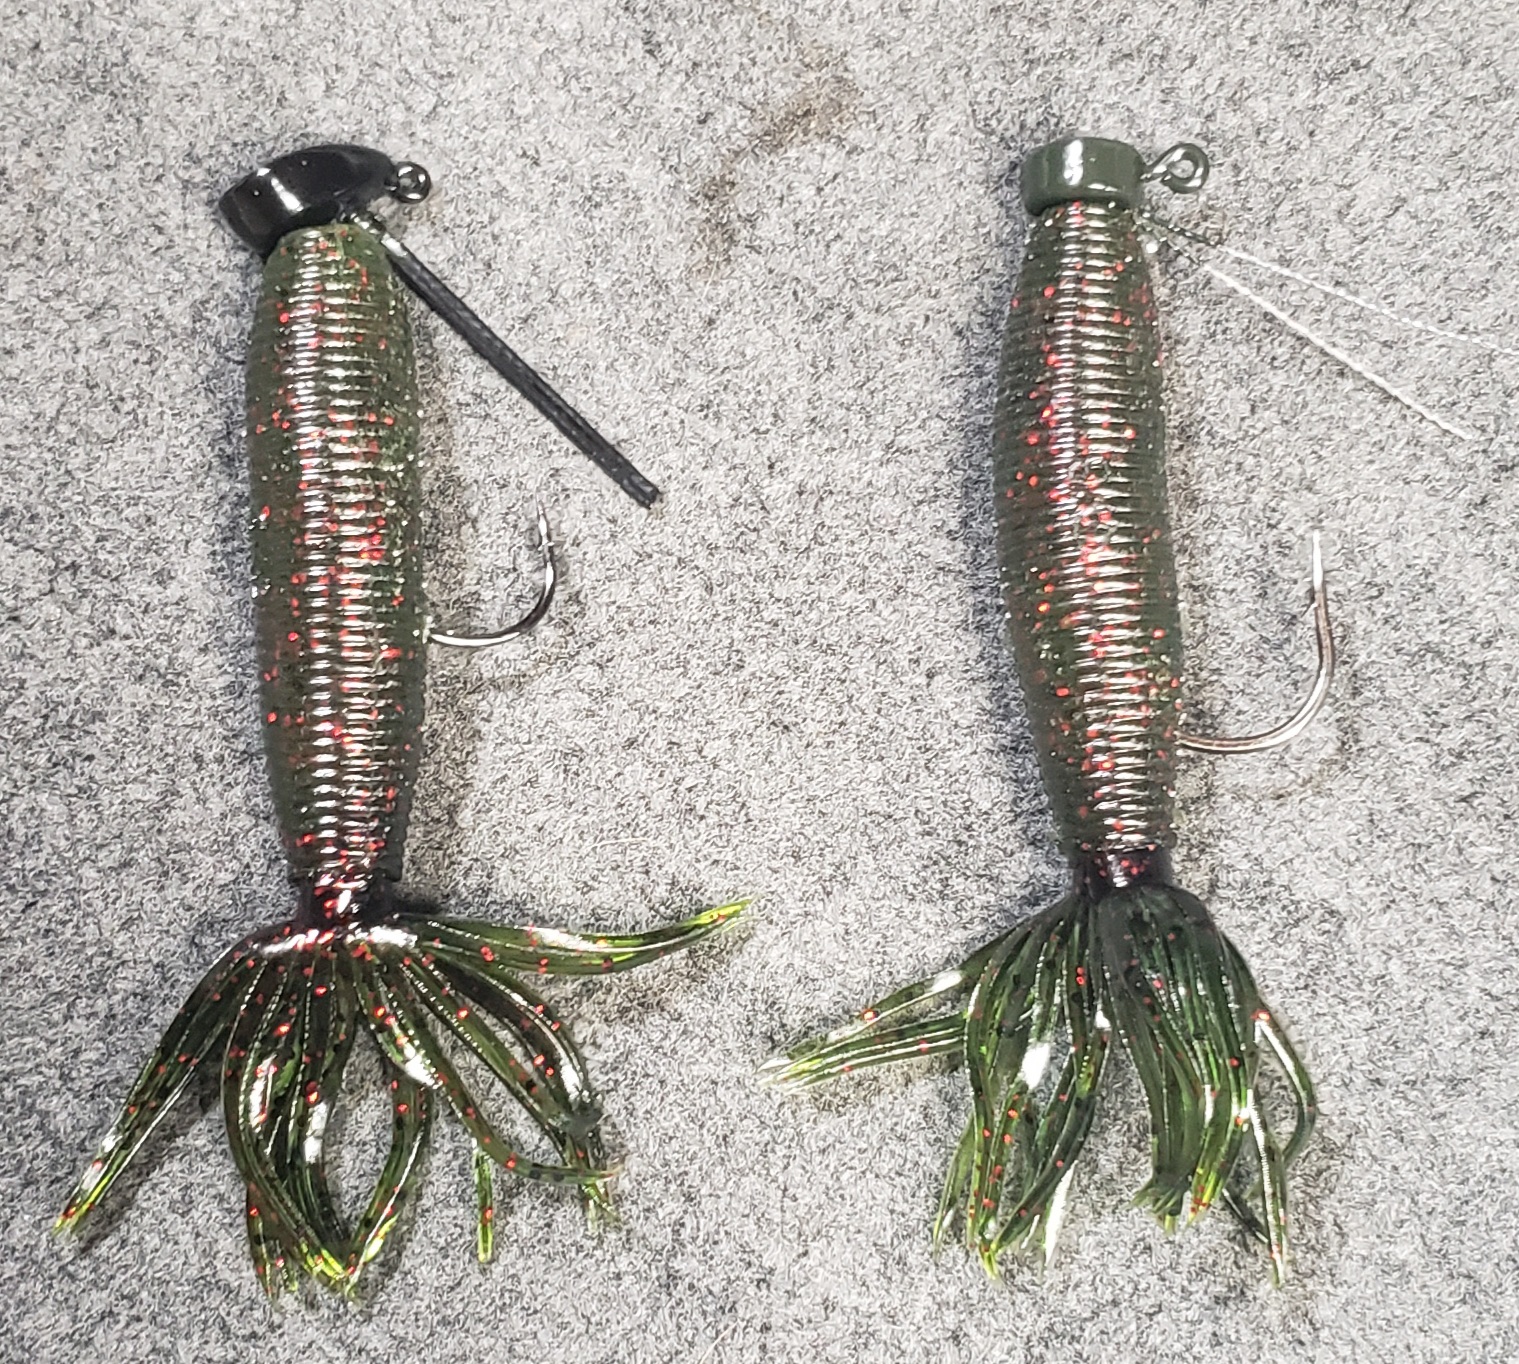 Crayfish, now I know why - Fishing Tackle - Bass Fishing Forums